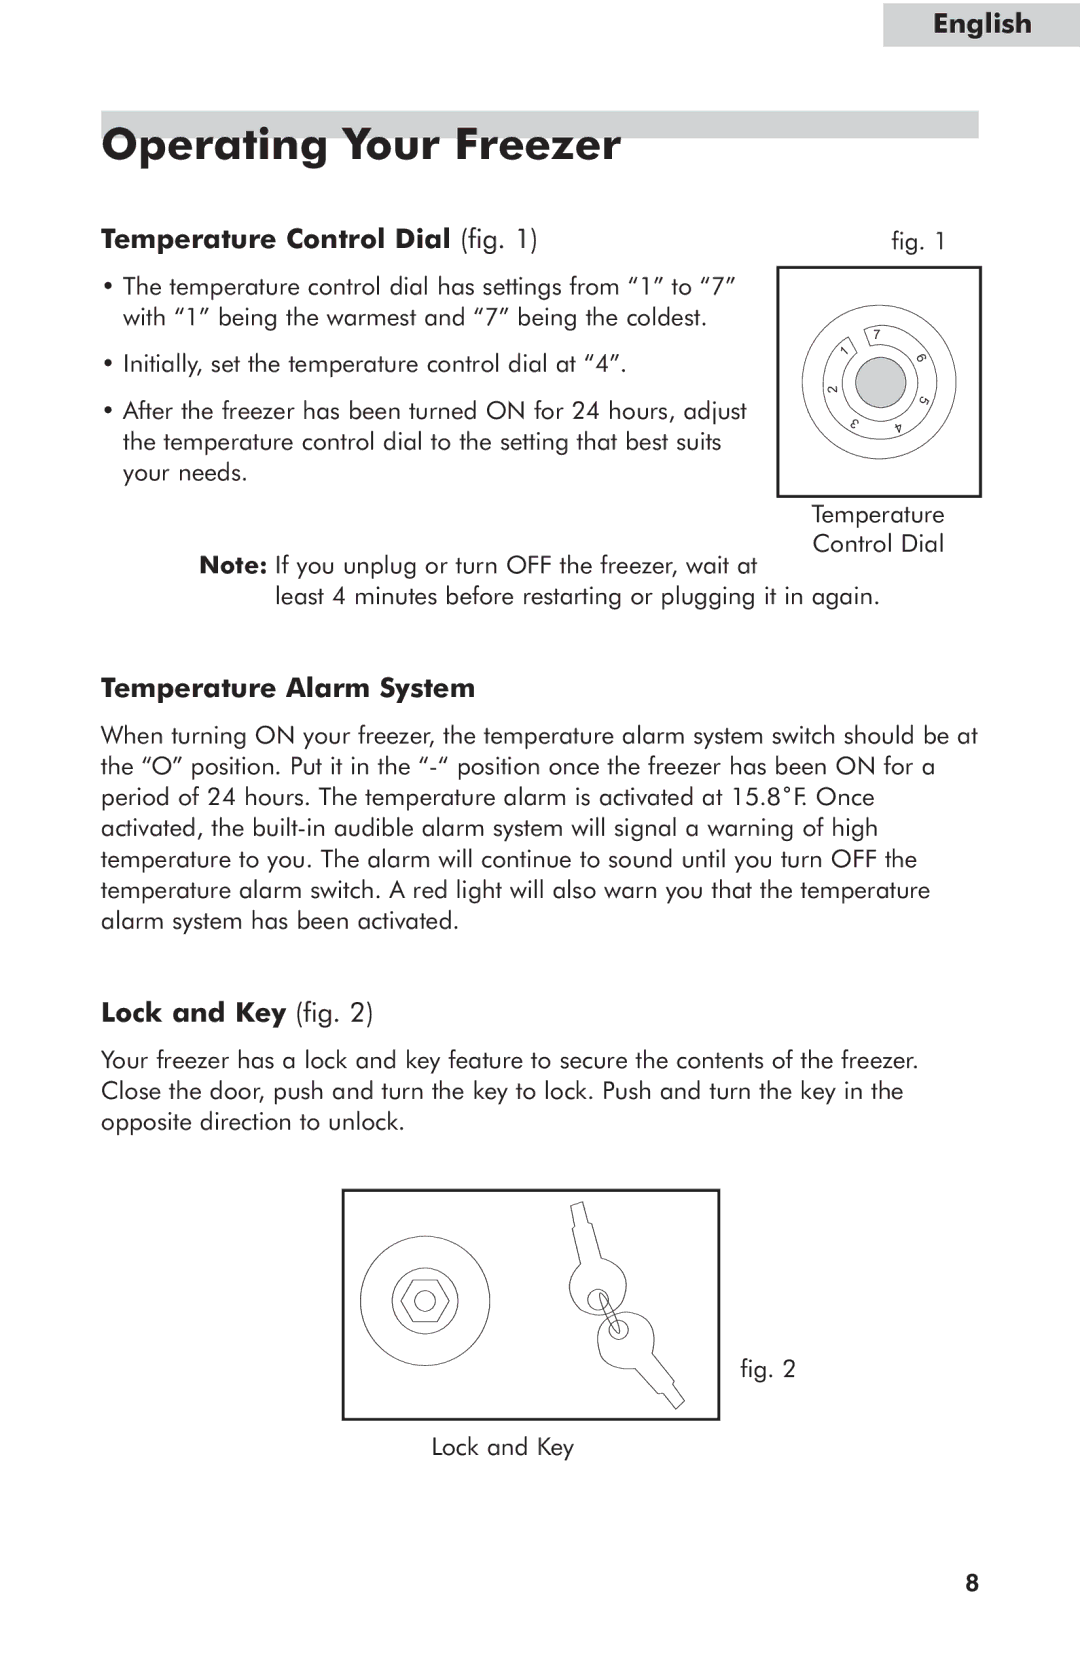 Haier HUF138PA, HUF205PA user manual Temperature Control Dial fig, Temperature Alarm System, Lock and Key fig 